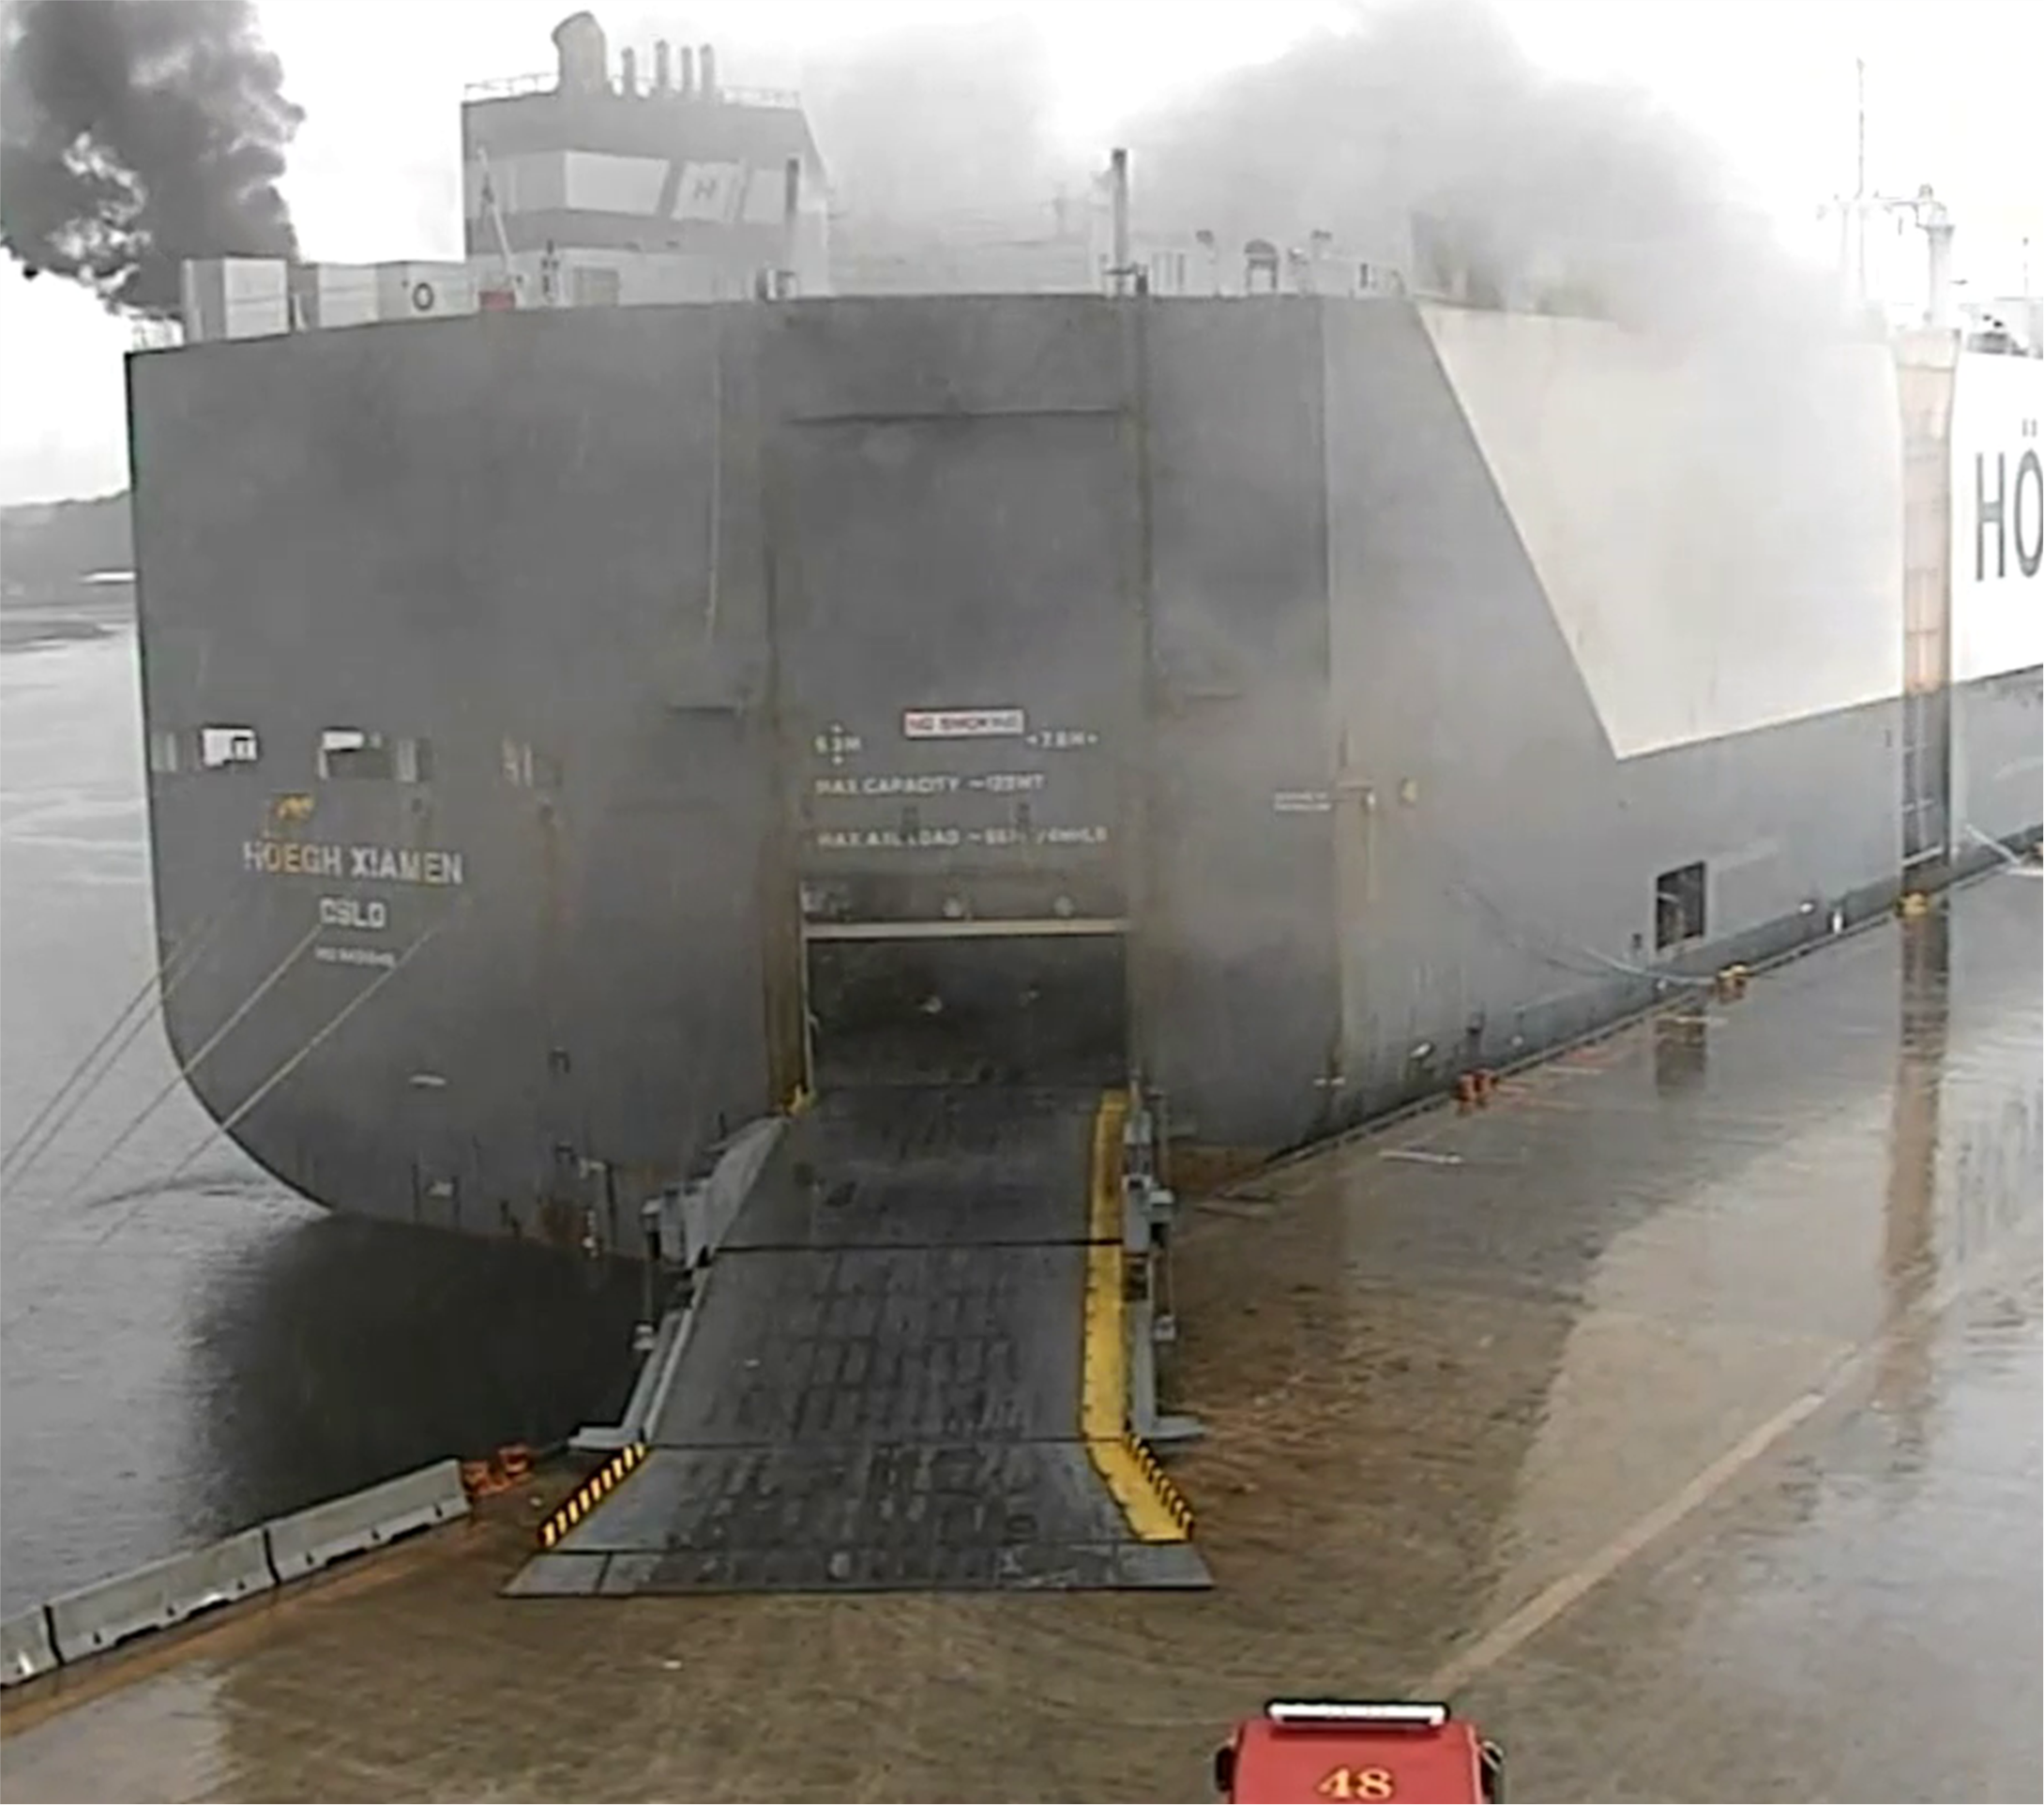 Smoke coming from the aft cargo deck ventilation housing exhausts of the Höegh Xiamen